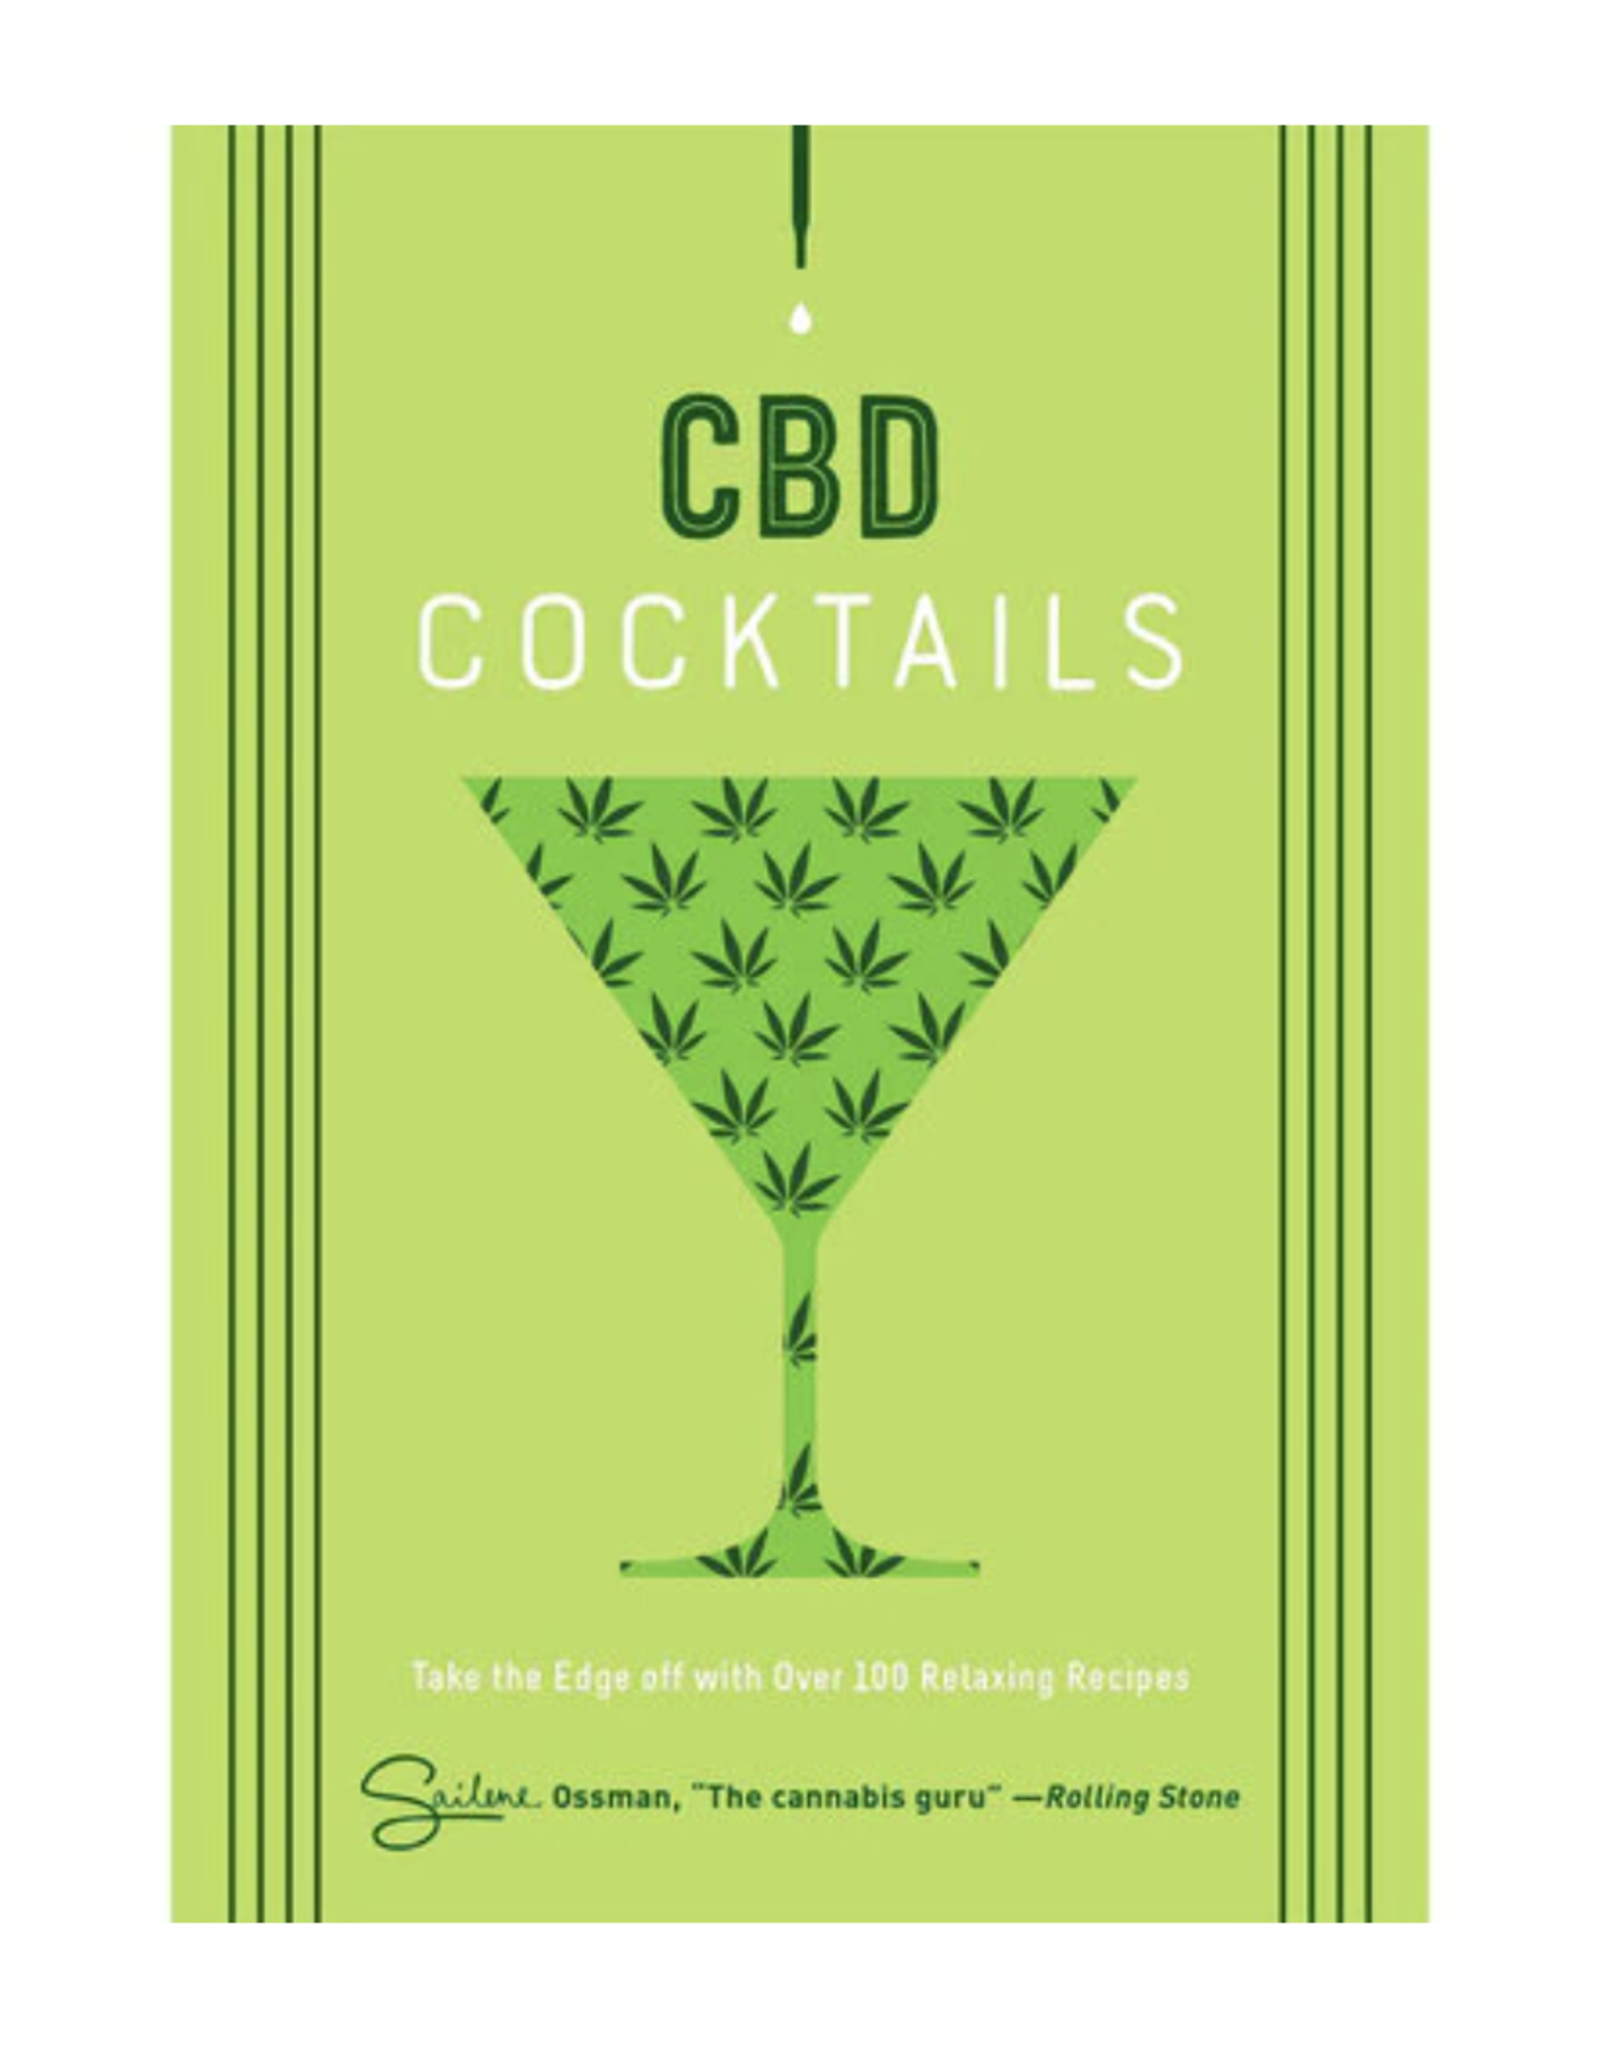 CBD Cocktails: Over 100 Recipes to Take the Edge Off by Sailene Ossman